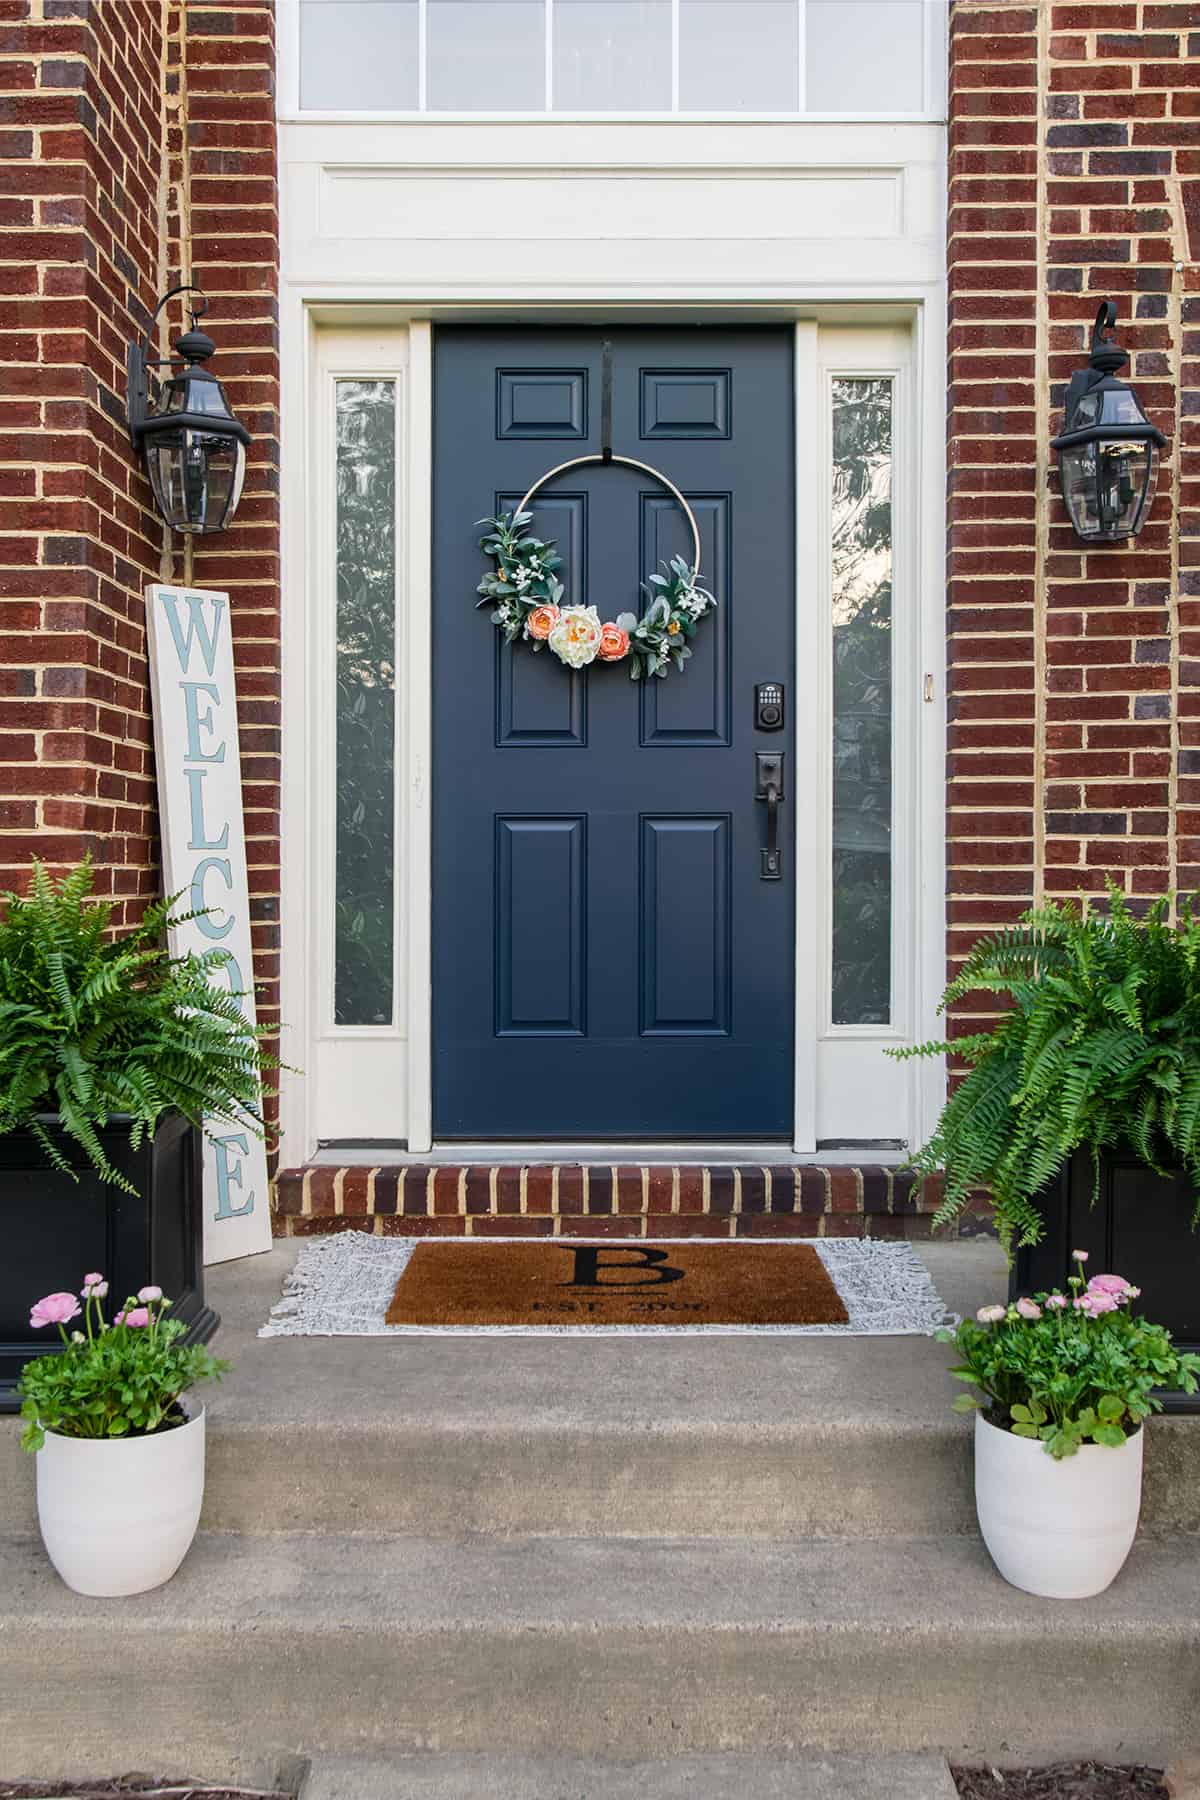 Dark blue font door on a brick house stoop with planters.